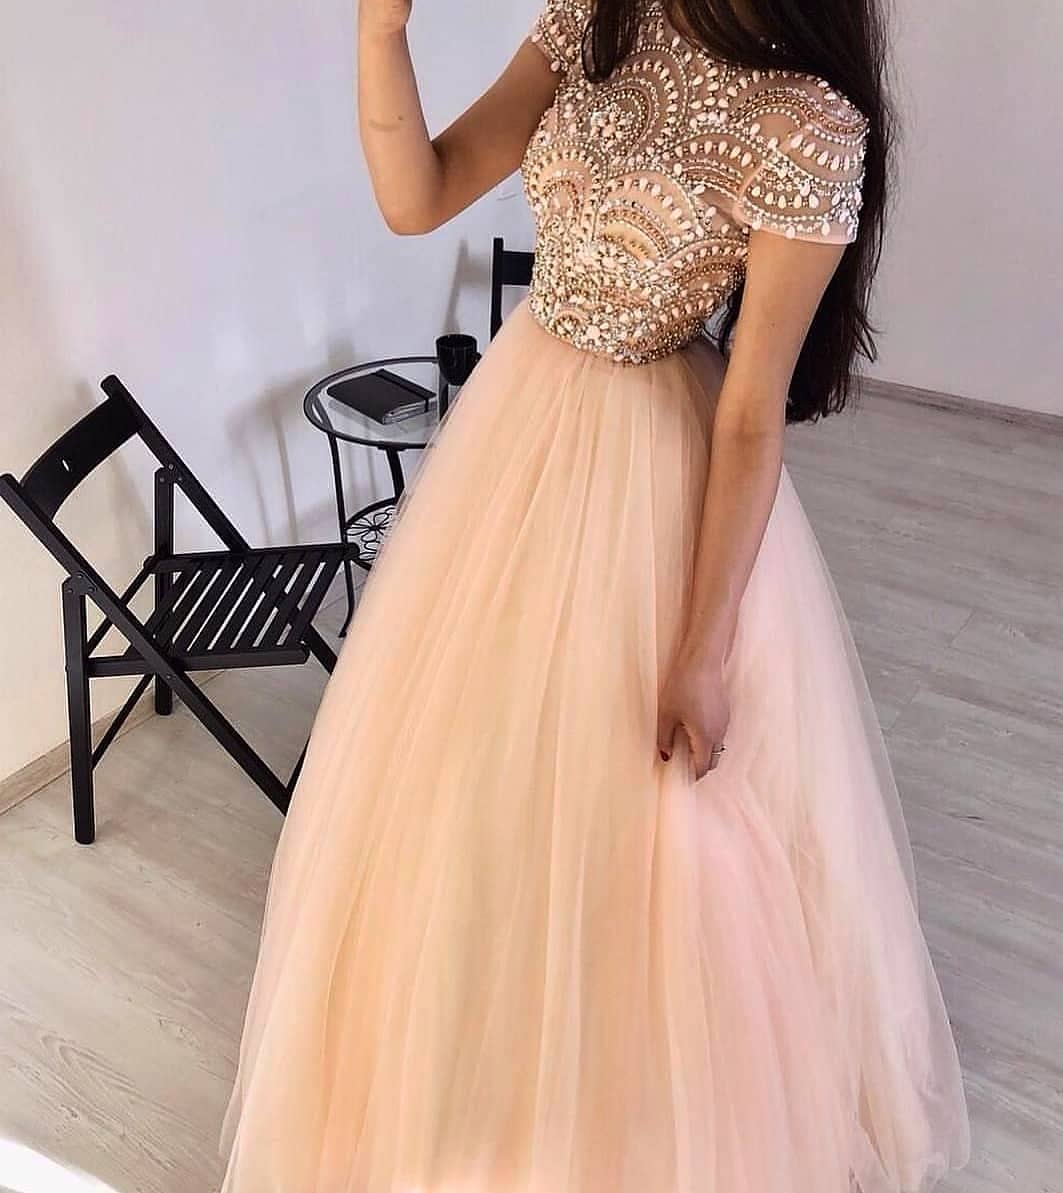 Princess Cap Sleeves tulle Ball Gown prom dress cg3738